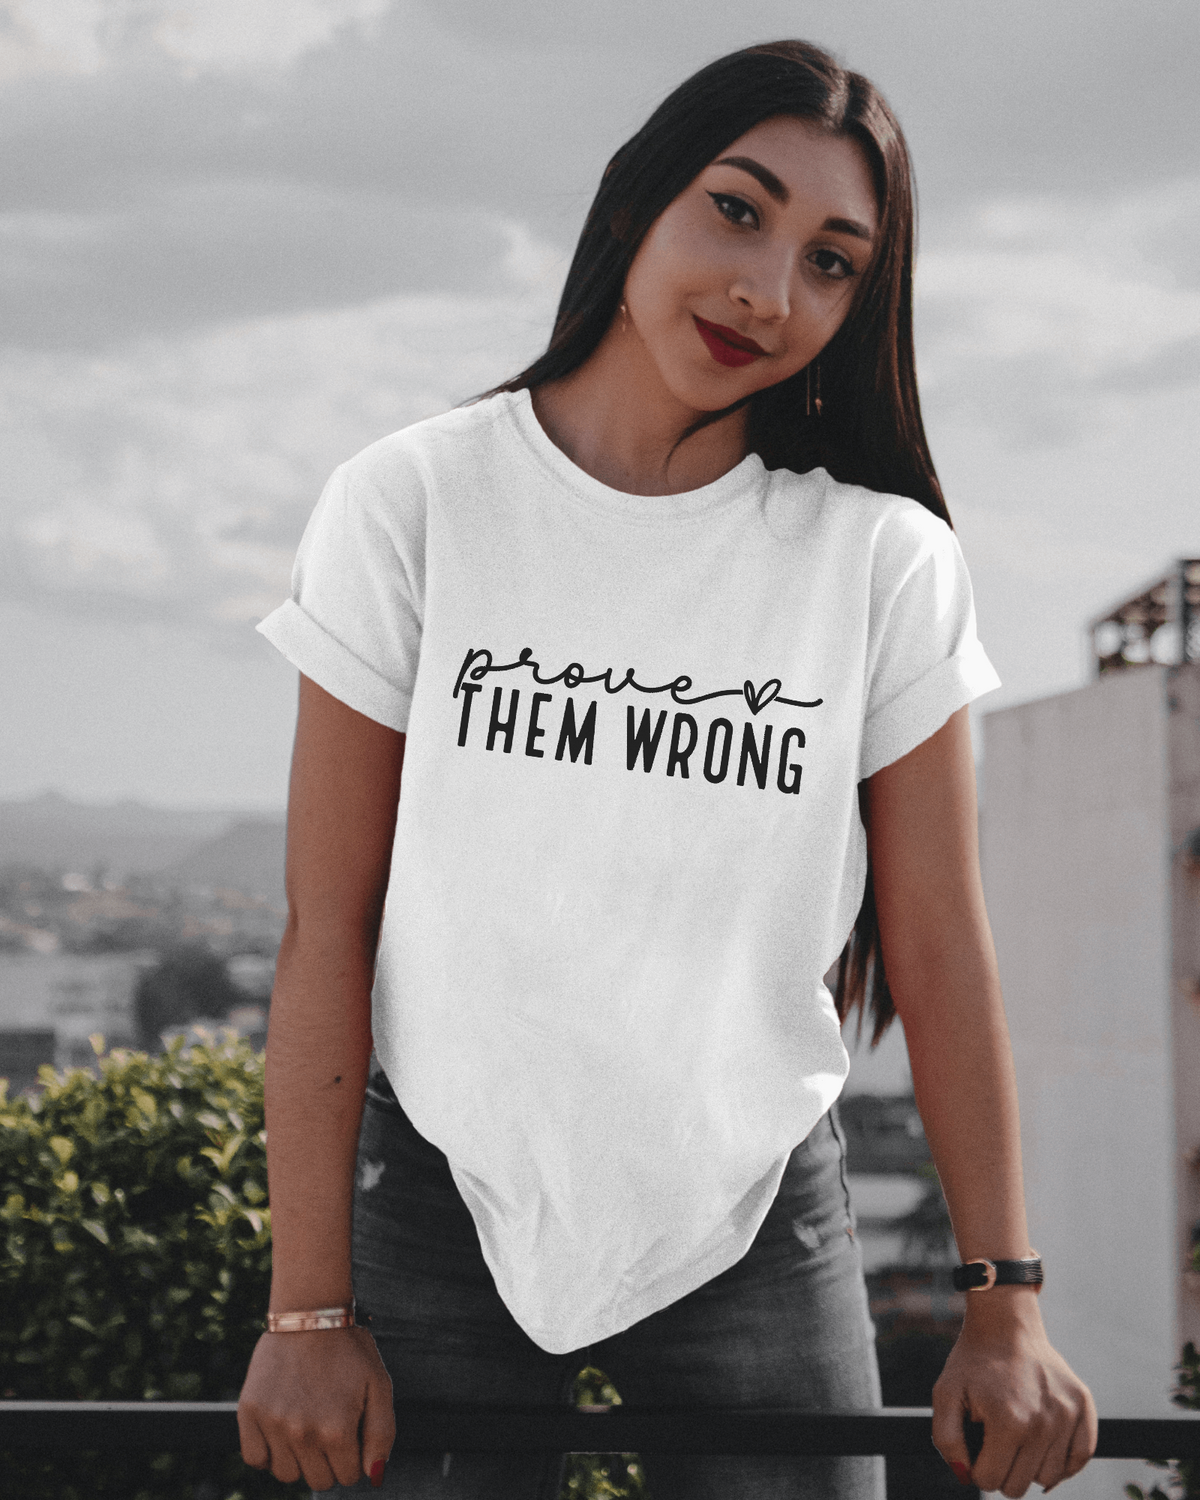 Woman wearing white t-shirt that says "Prove Them Wrong"